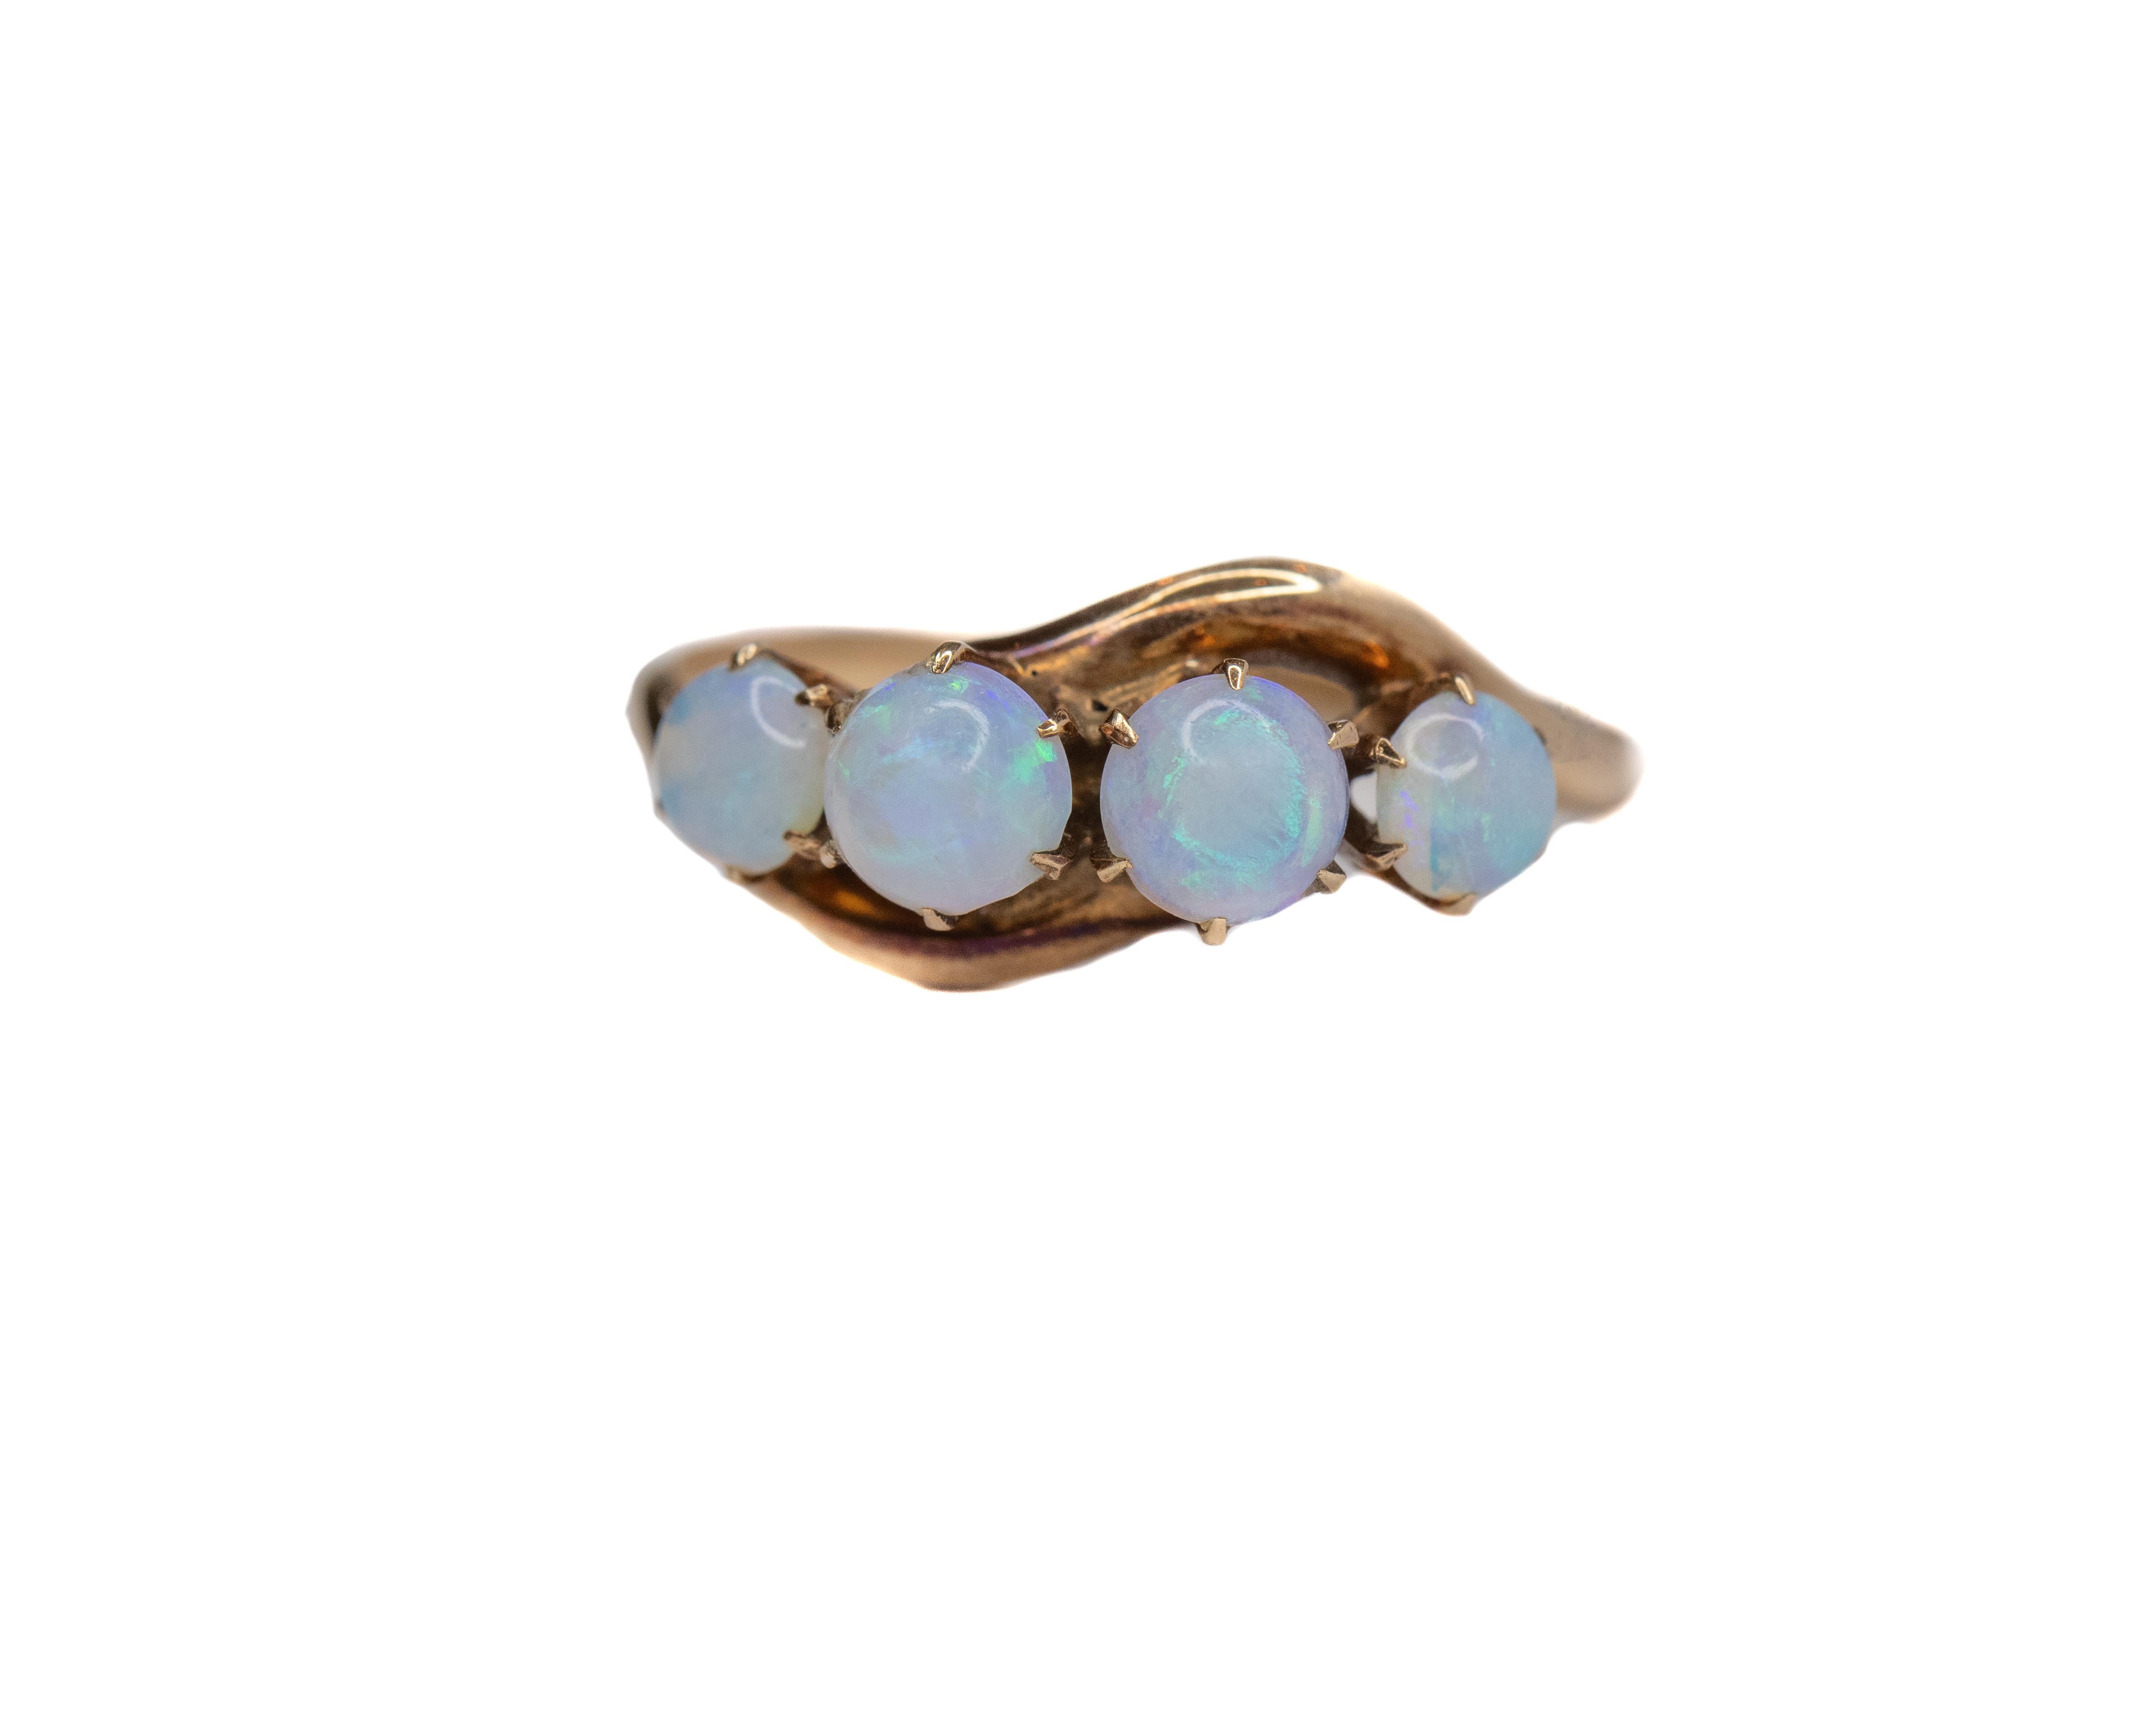 Ring Details:
Metal: 14 Karat and 9 Karat Yellow Gold
Weight: 1.89 grams
Ring Size: 7 (resizable)

Opal Accent Details: 4 Count, .5 carat total weight 

Victorian ring, from the 1890s with a simple, yet elegant design featuring 4 opals in u-prong